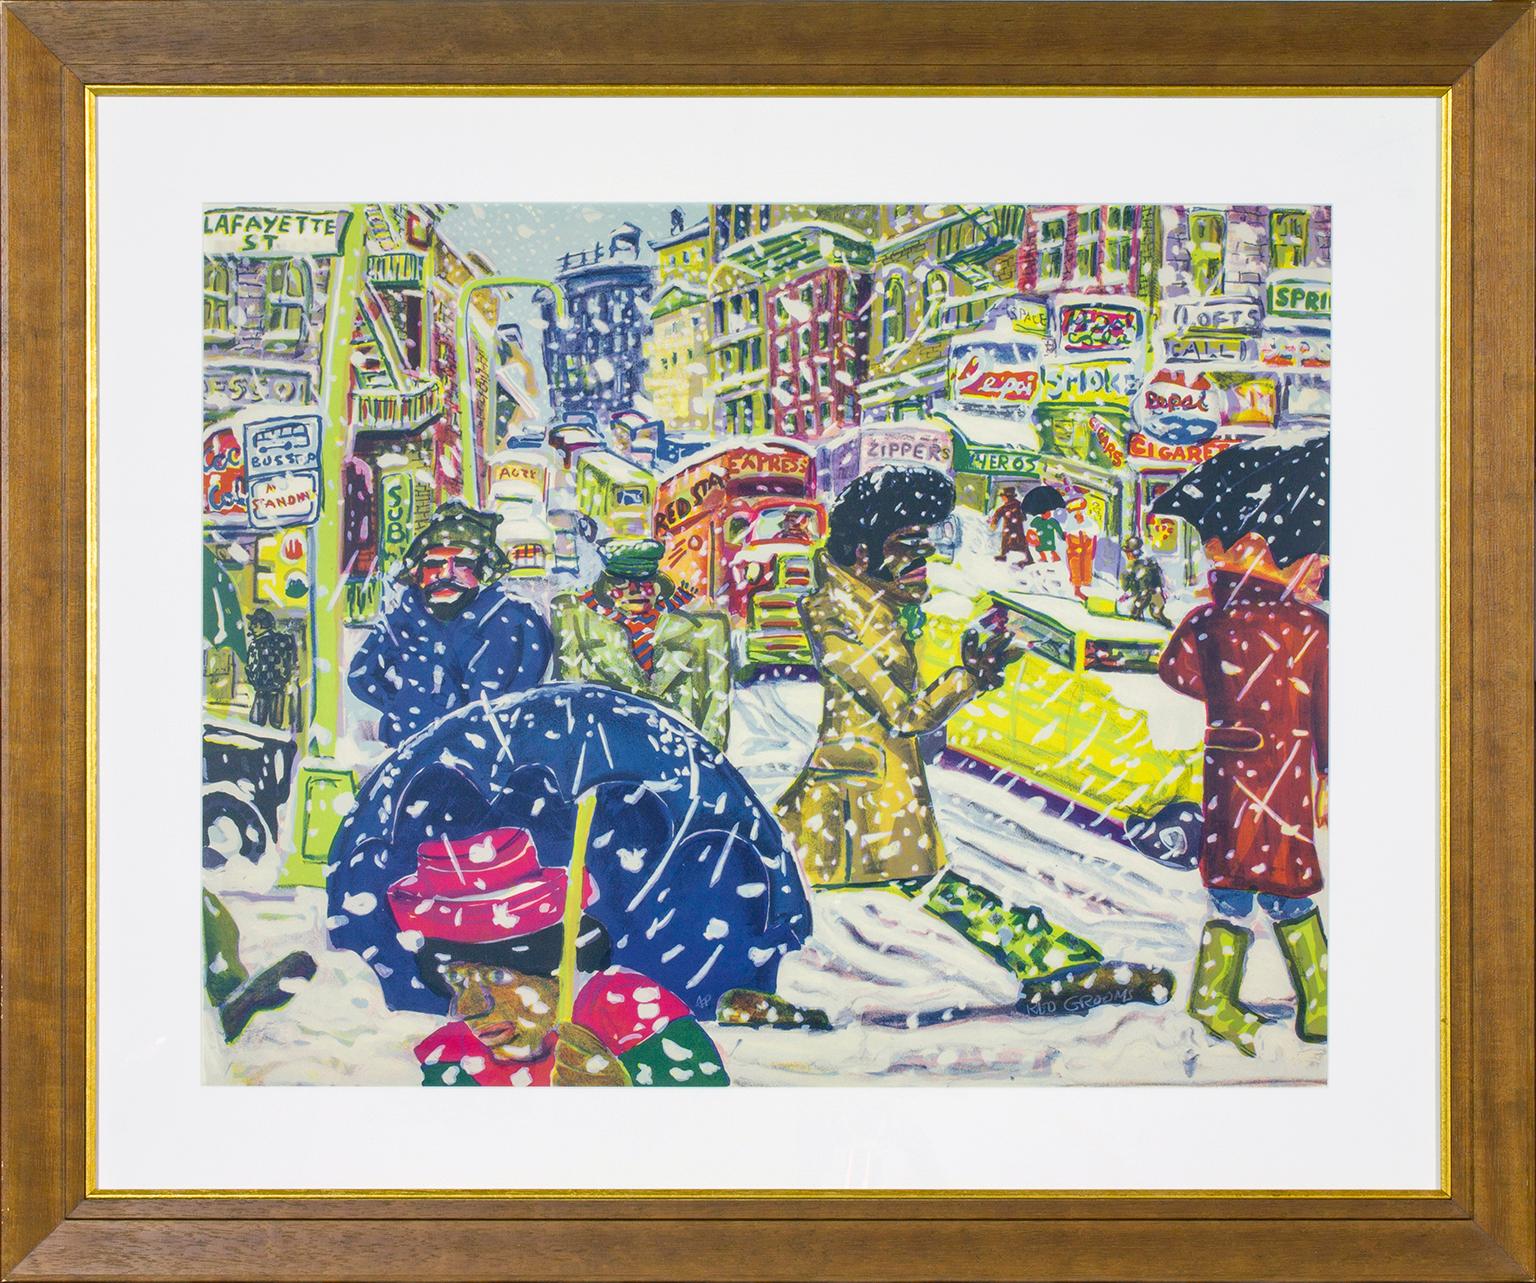 "Slushing" lithograph by Red Grooms from 1971 "No Gas" portfolio. Signed AP at bottom of blue umbrella in center of image and Red Grooms on shoe in lower right corner. Depicts people and traffic, including the Red Star Express on Lafayette Street in